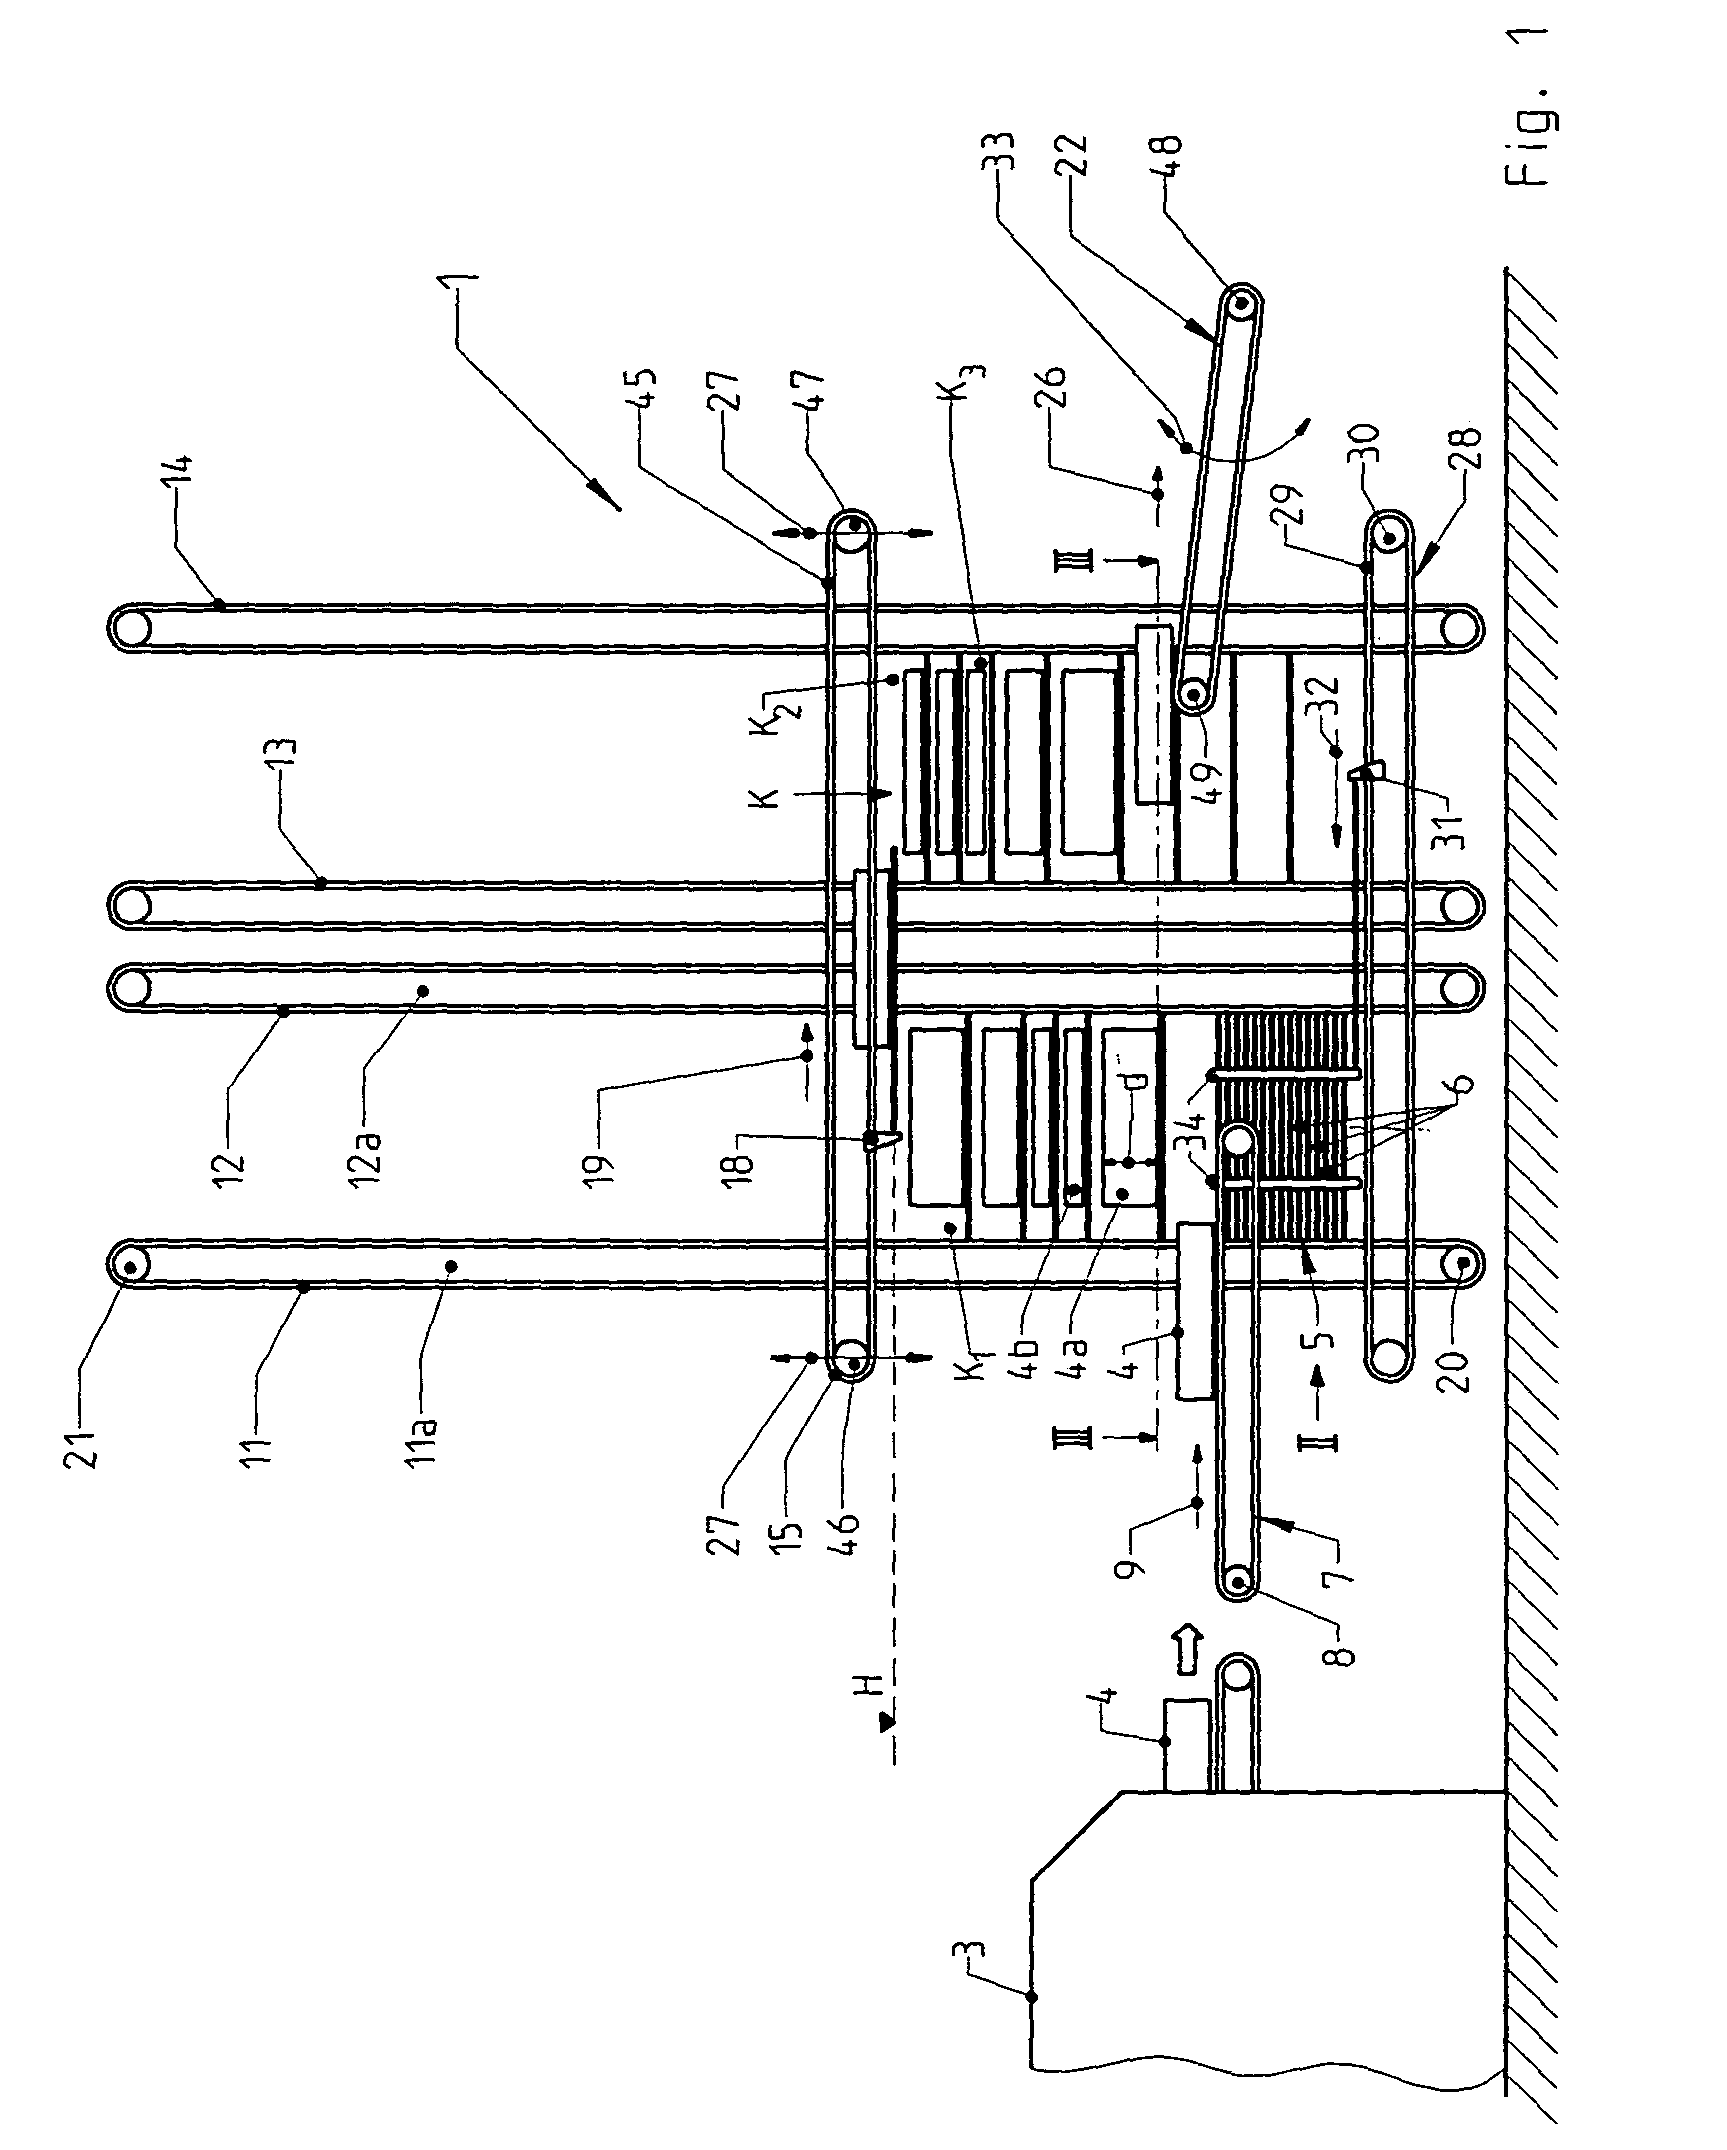 Conveying arrangement for processing printed products